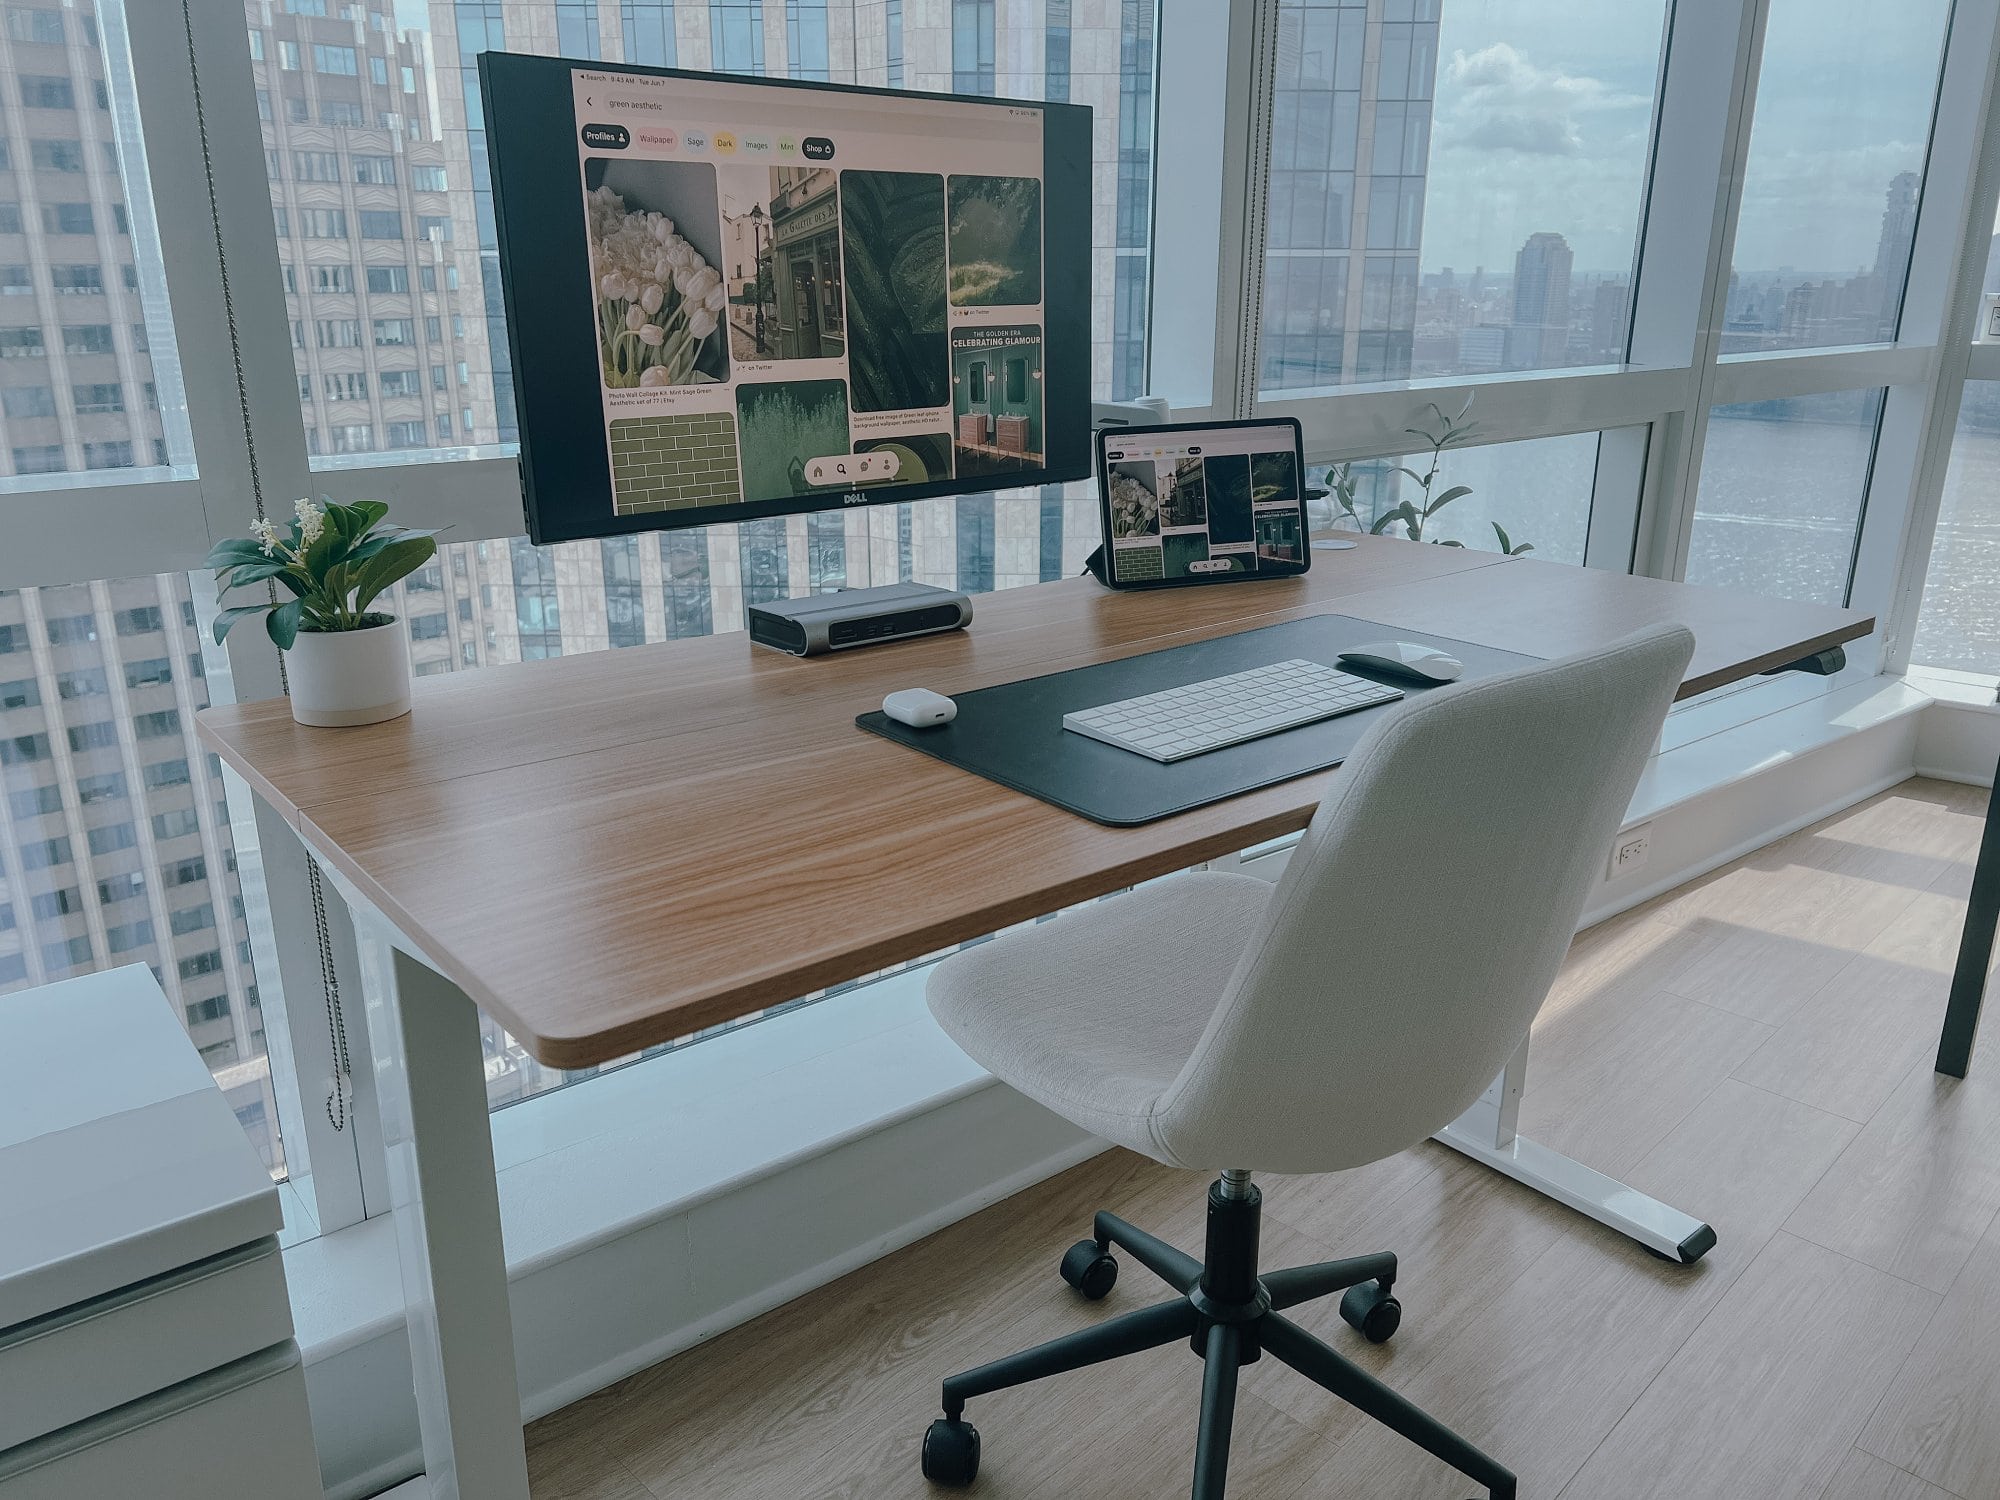 A well-organised workspace featuring a Flexispot standing desk